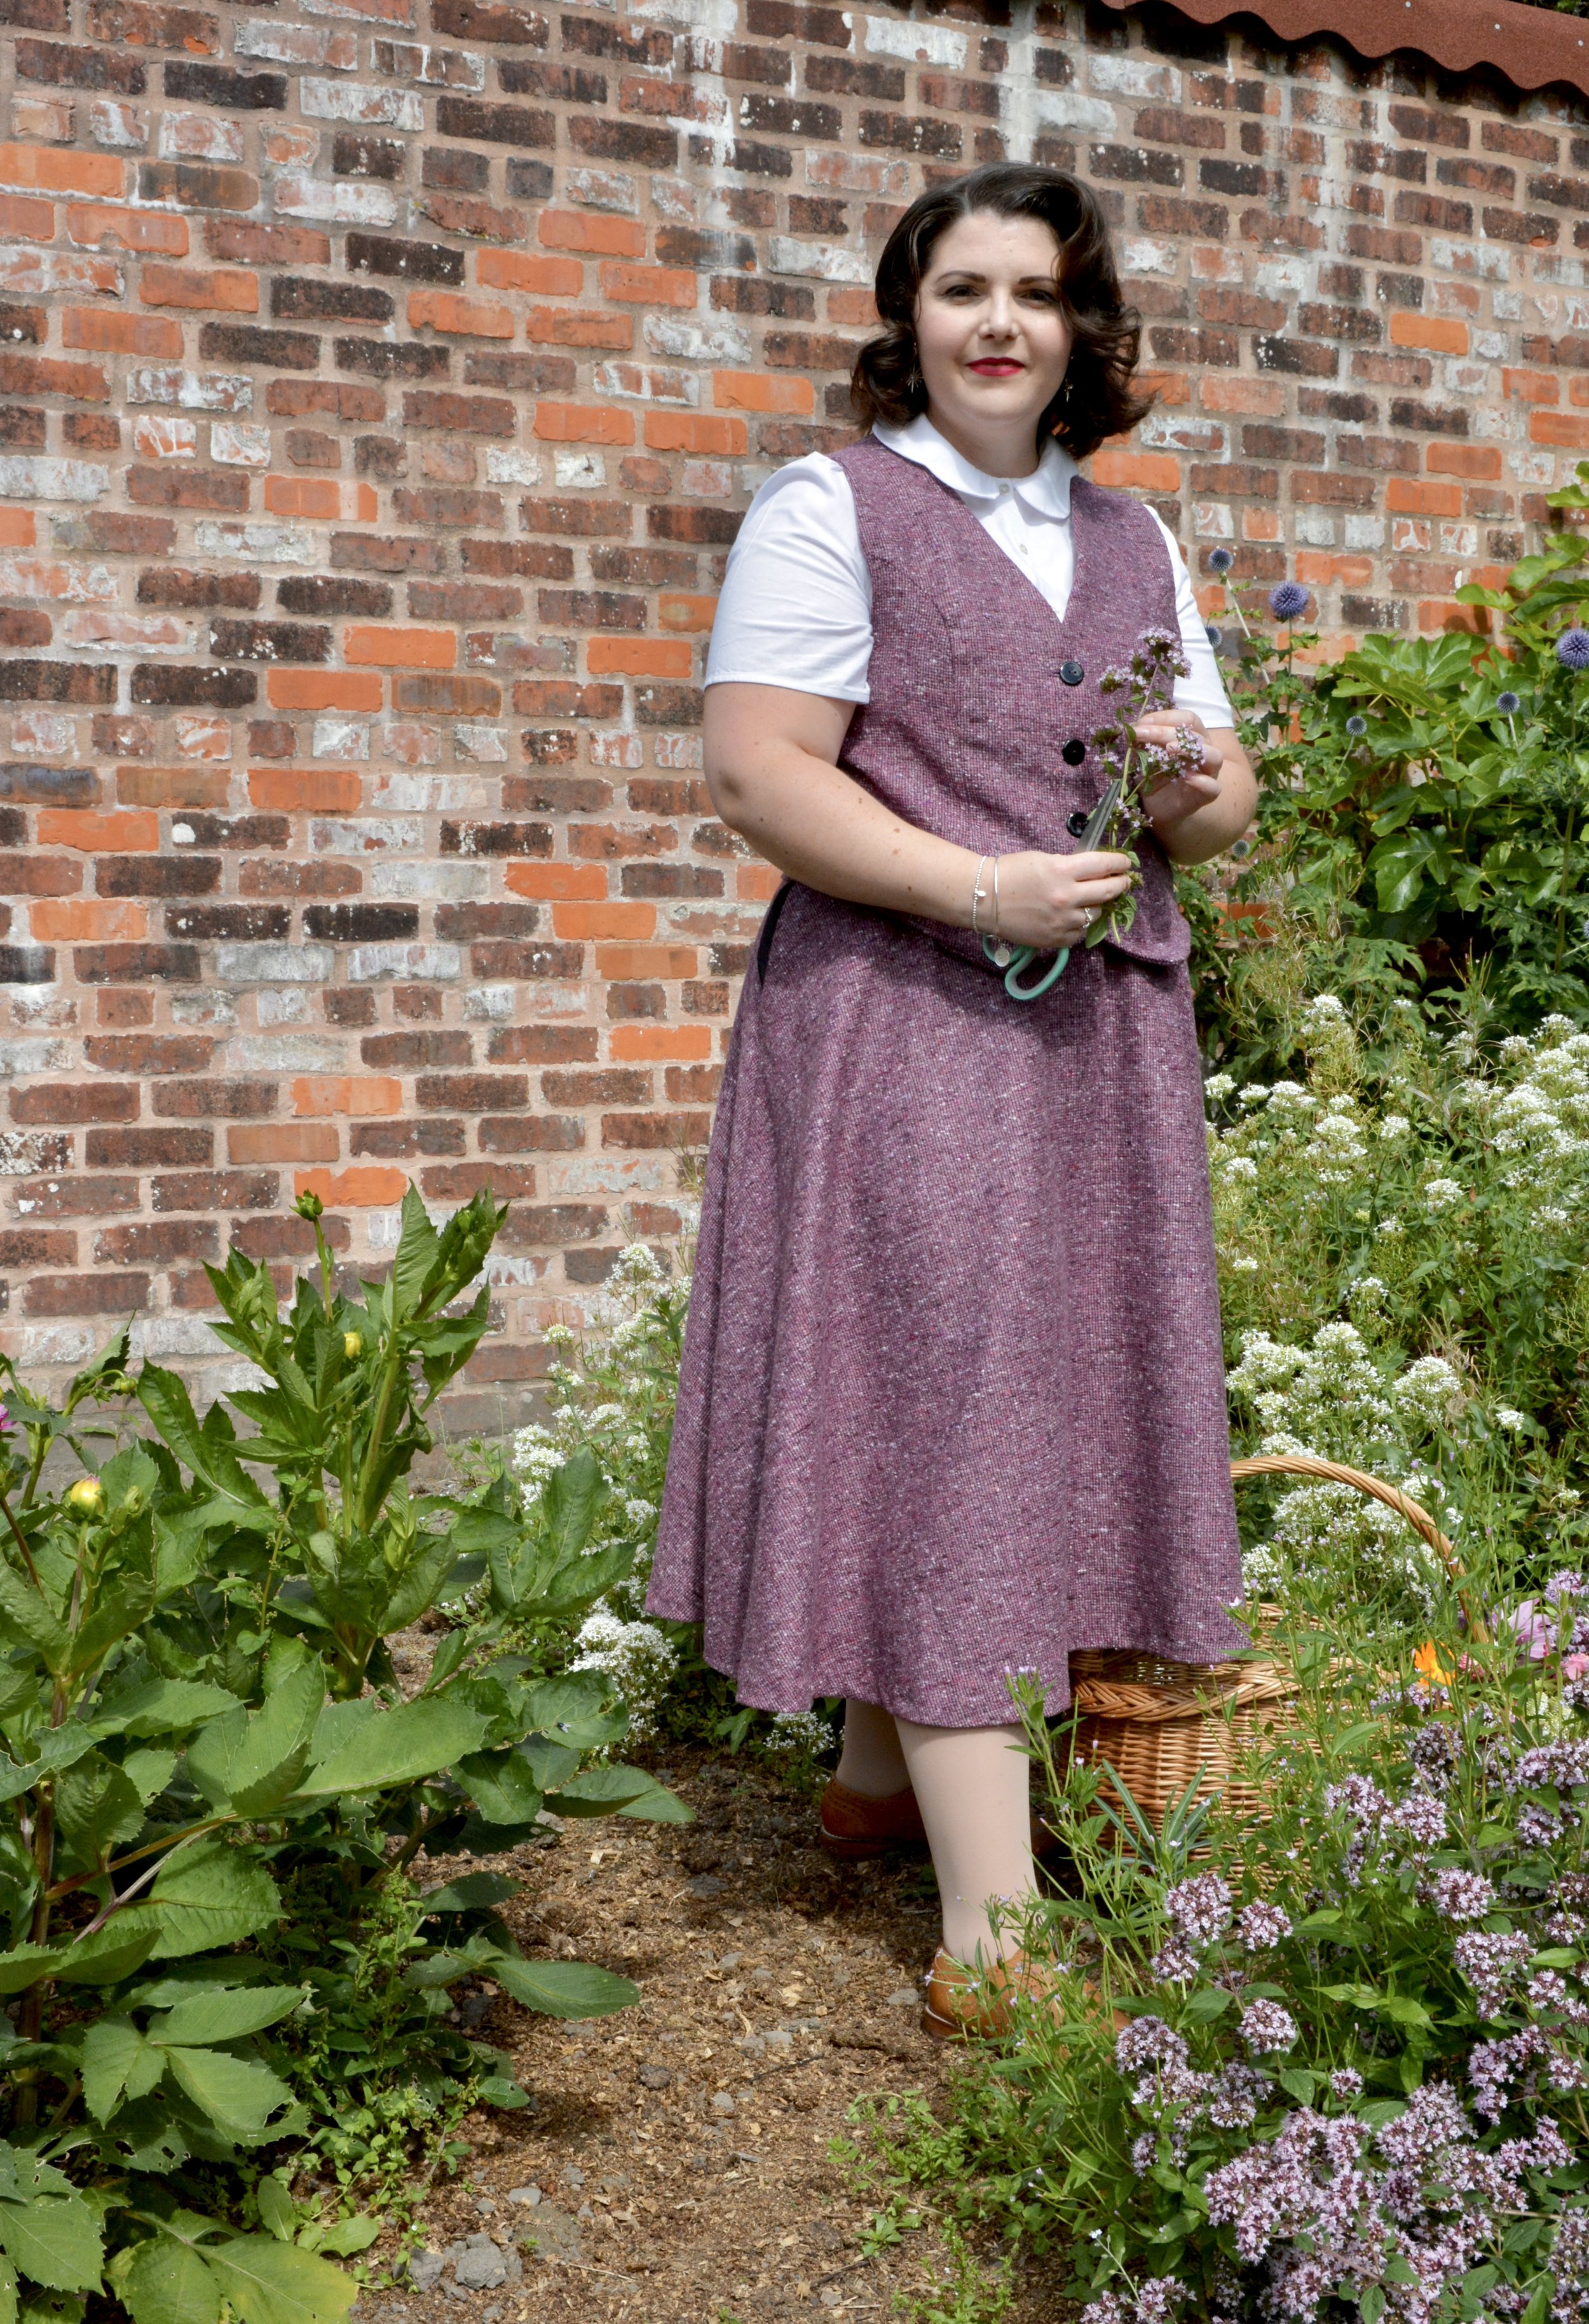 'Polly' waistcoat and 'Rosie' skirt